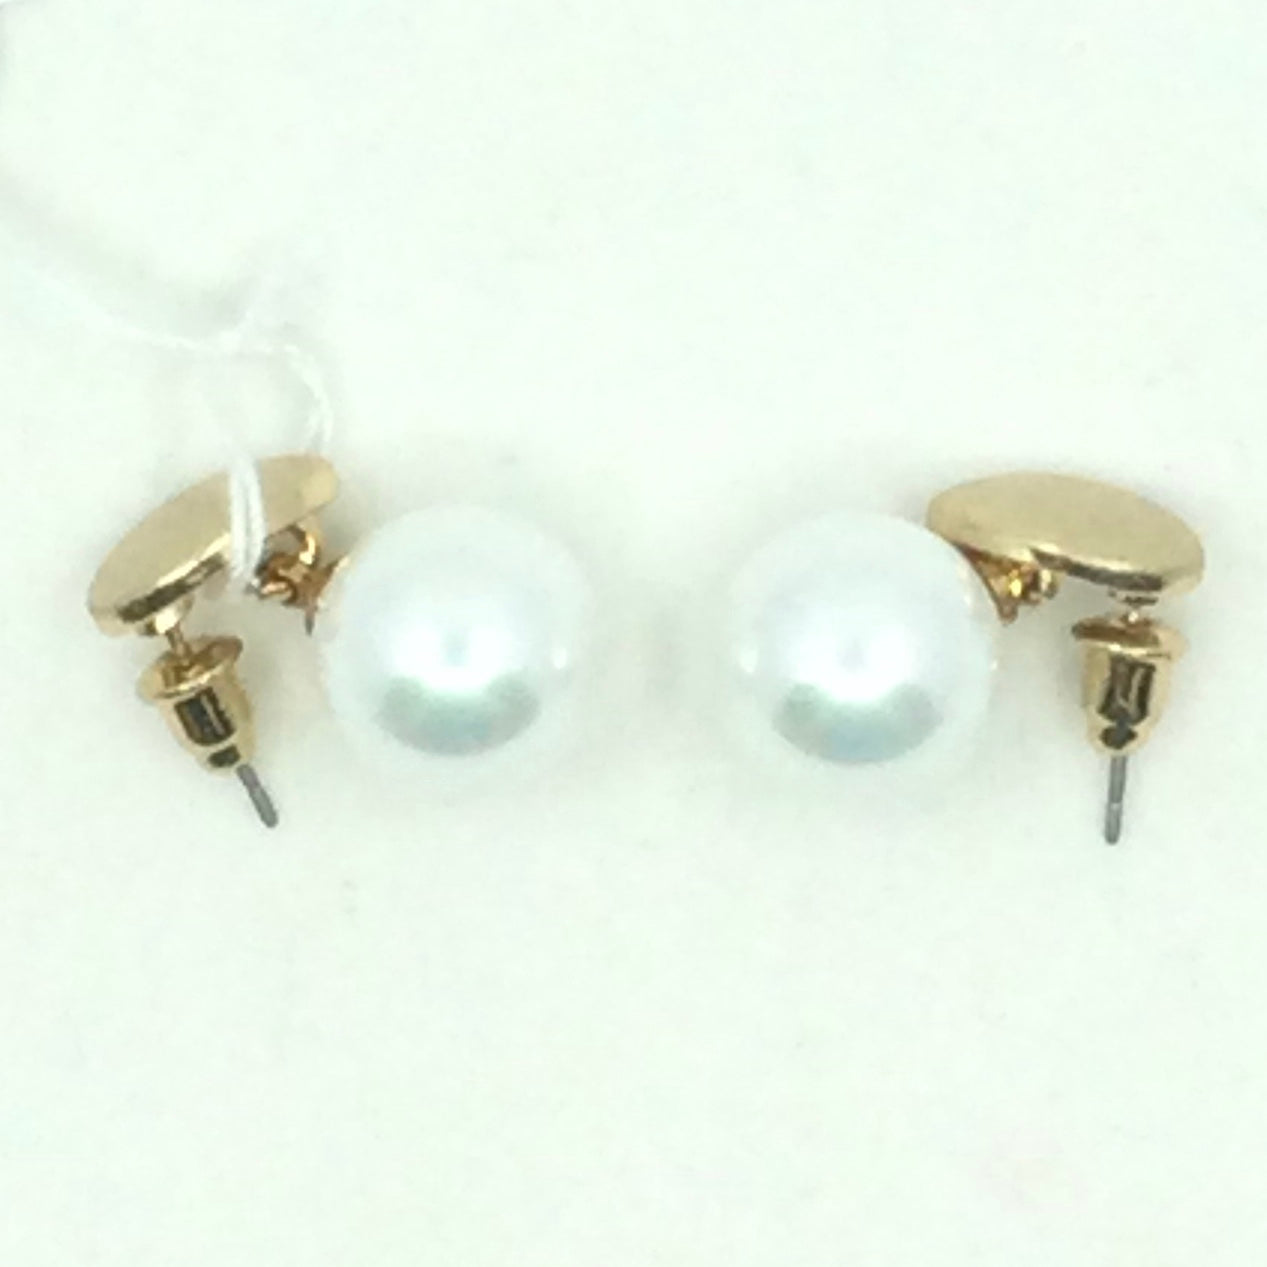 Brushed Metallic Earrings with Pearl - White & Gold